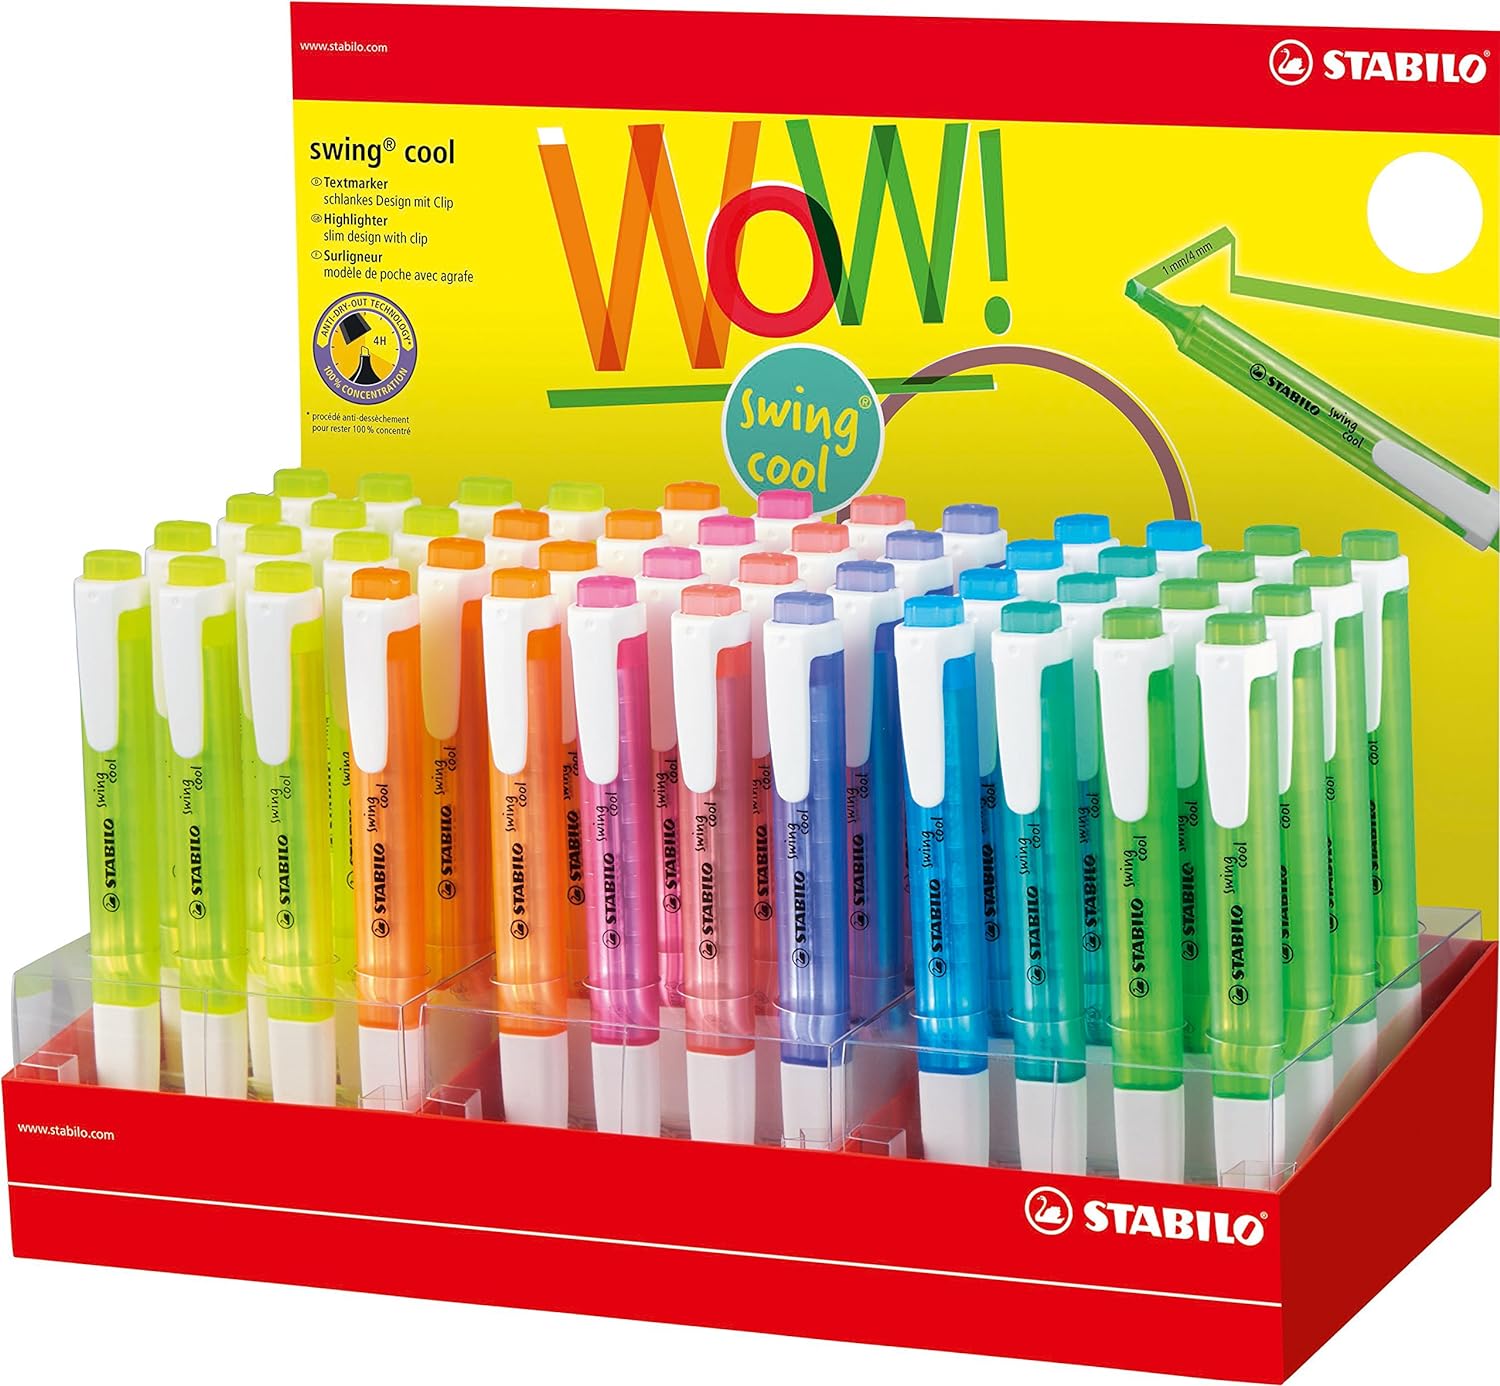 STABILO  Swing Cool Fluorescent Marker, Assorted Display